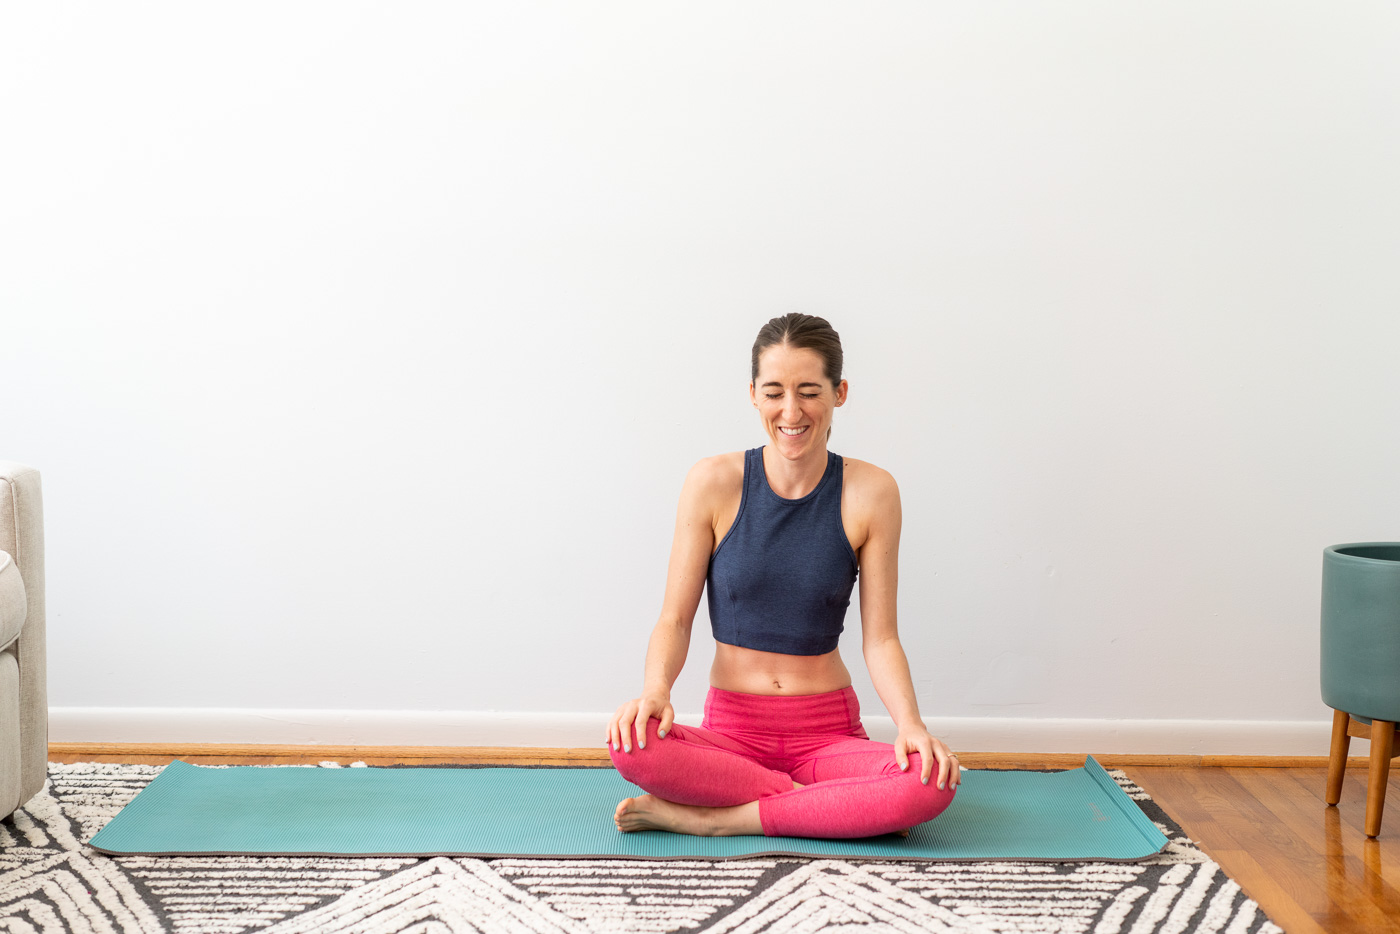 Woman in workout clothing sitting cross-legged on a yoga mat